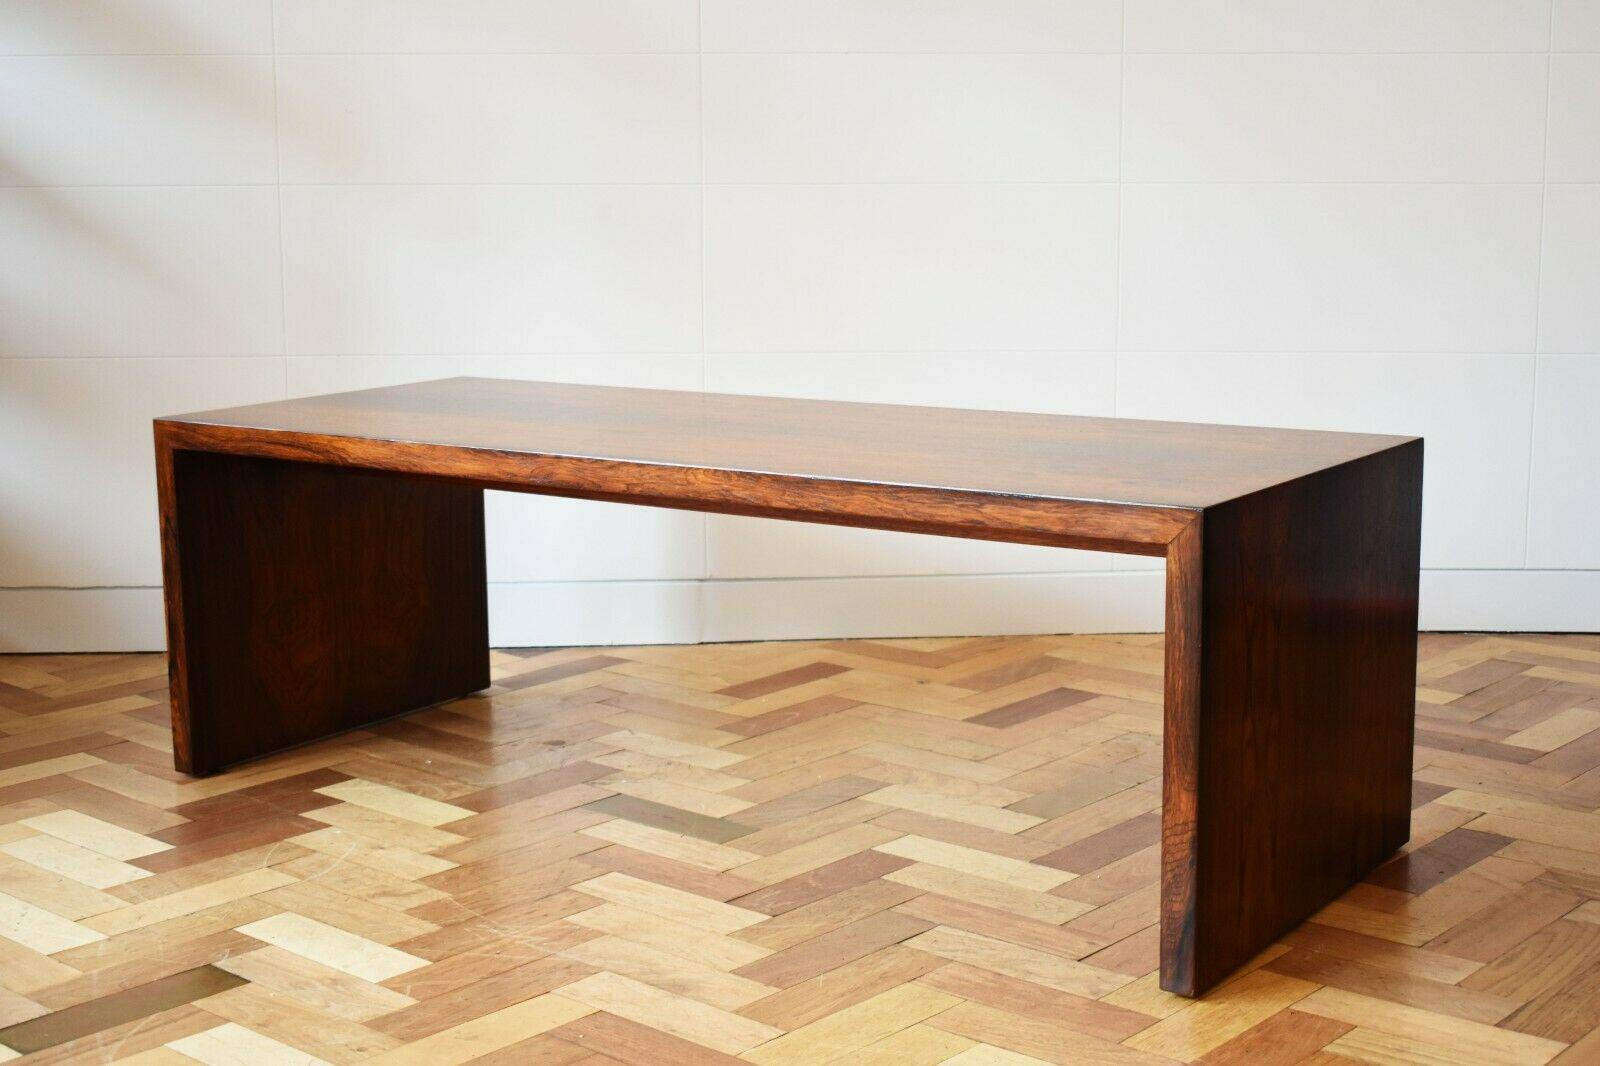 A beautiful and rare rosewood coffee table, boasting a simplistic elegance through it's waterfall design and flowing lines. The rectangular top is raised on solid board, making it a timeless design. 

Fantastic vintage condition with a beautiful